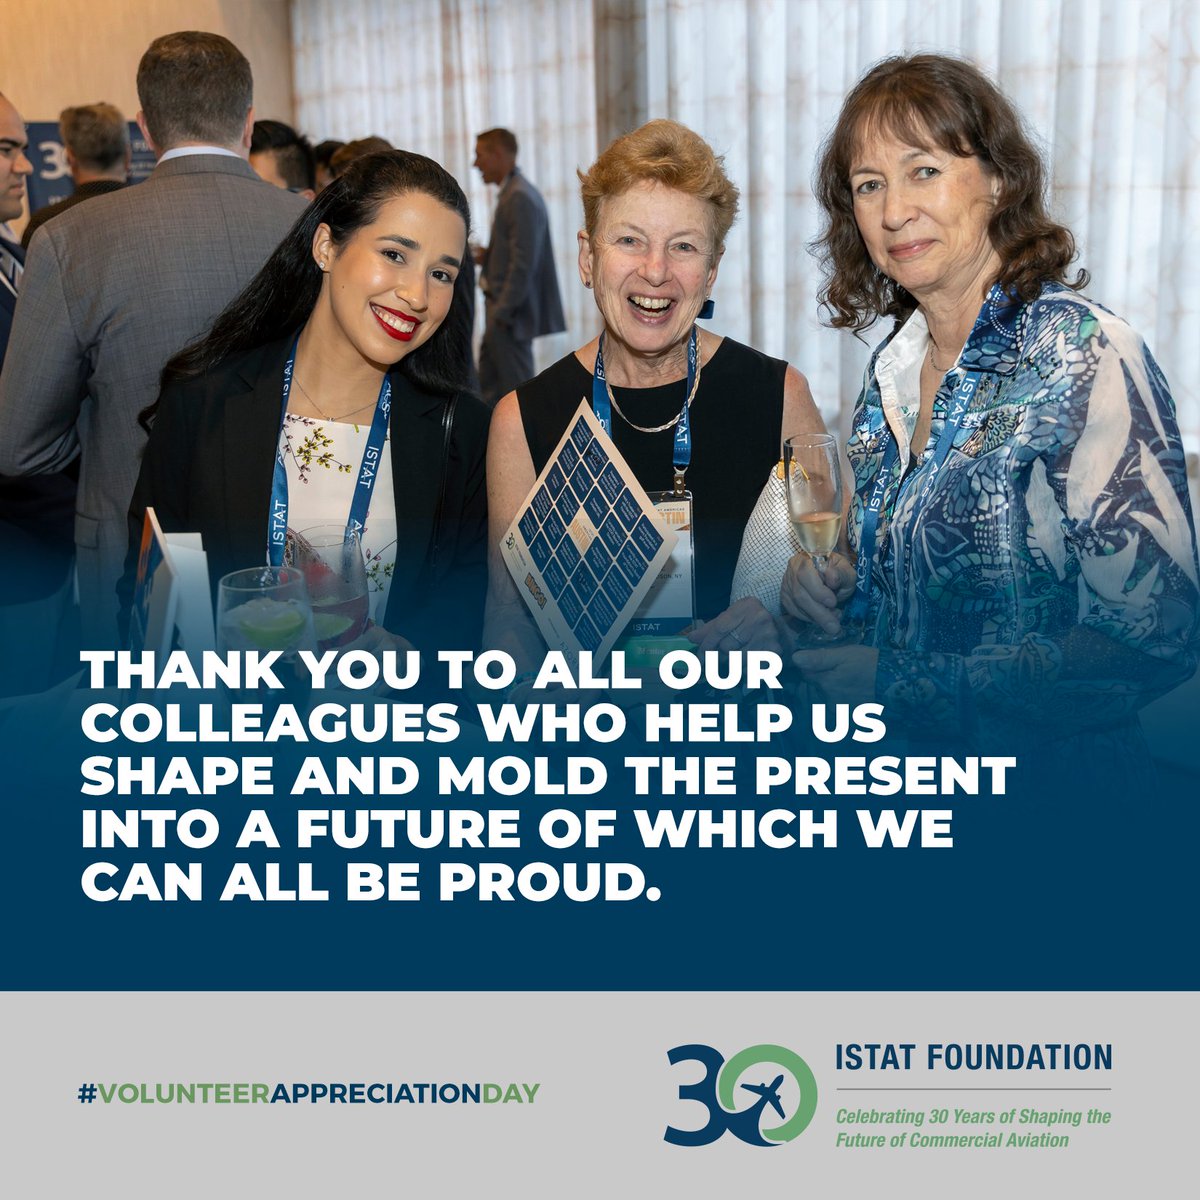 In honor of #VolunteerAppreciationDay, we want to thank all the executives from across the #aviation community who continue to give their time, resources and patience to support the ISTAT Foundation’s Internship and Mentorship Committee events. #ISTATMentors #ISTATcares